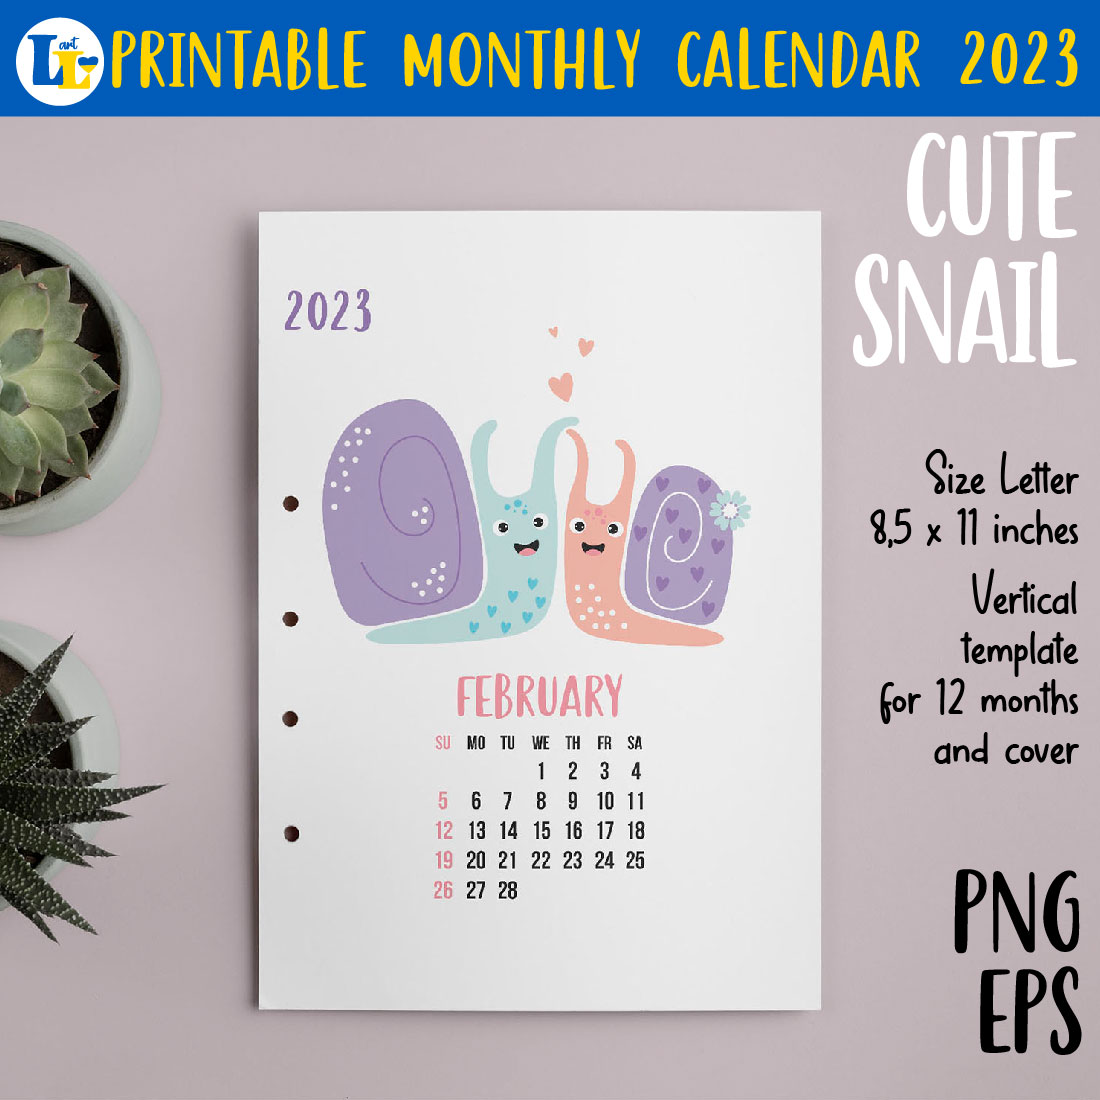 Cute Snail. Kids Calendar 2023 Printable Monthly Template preview image.